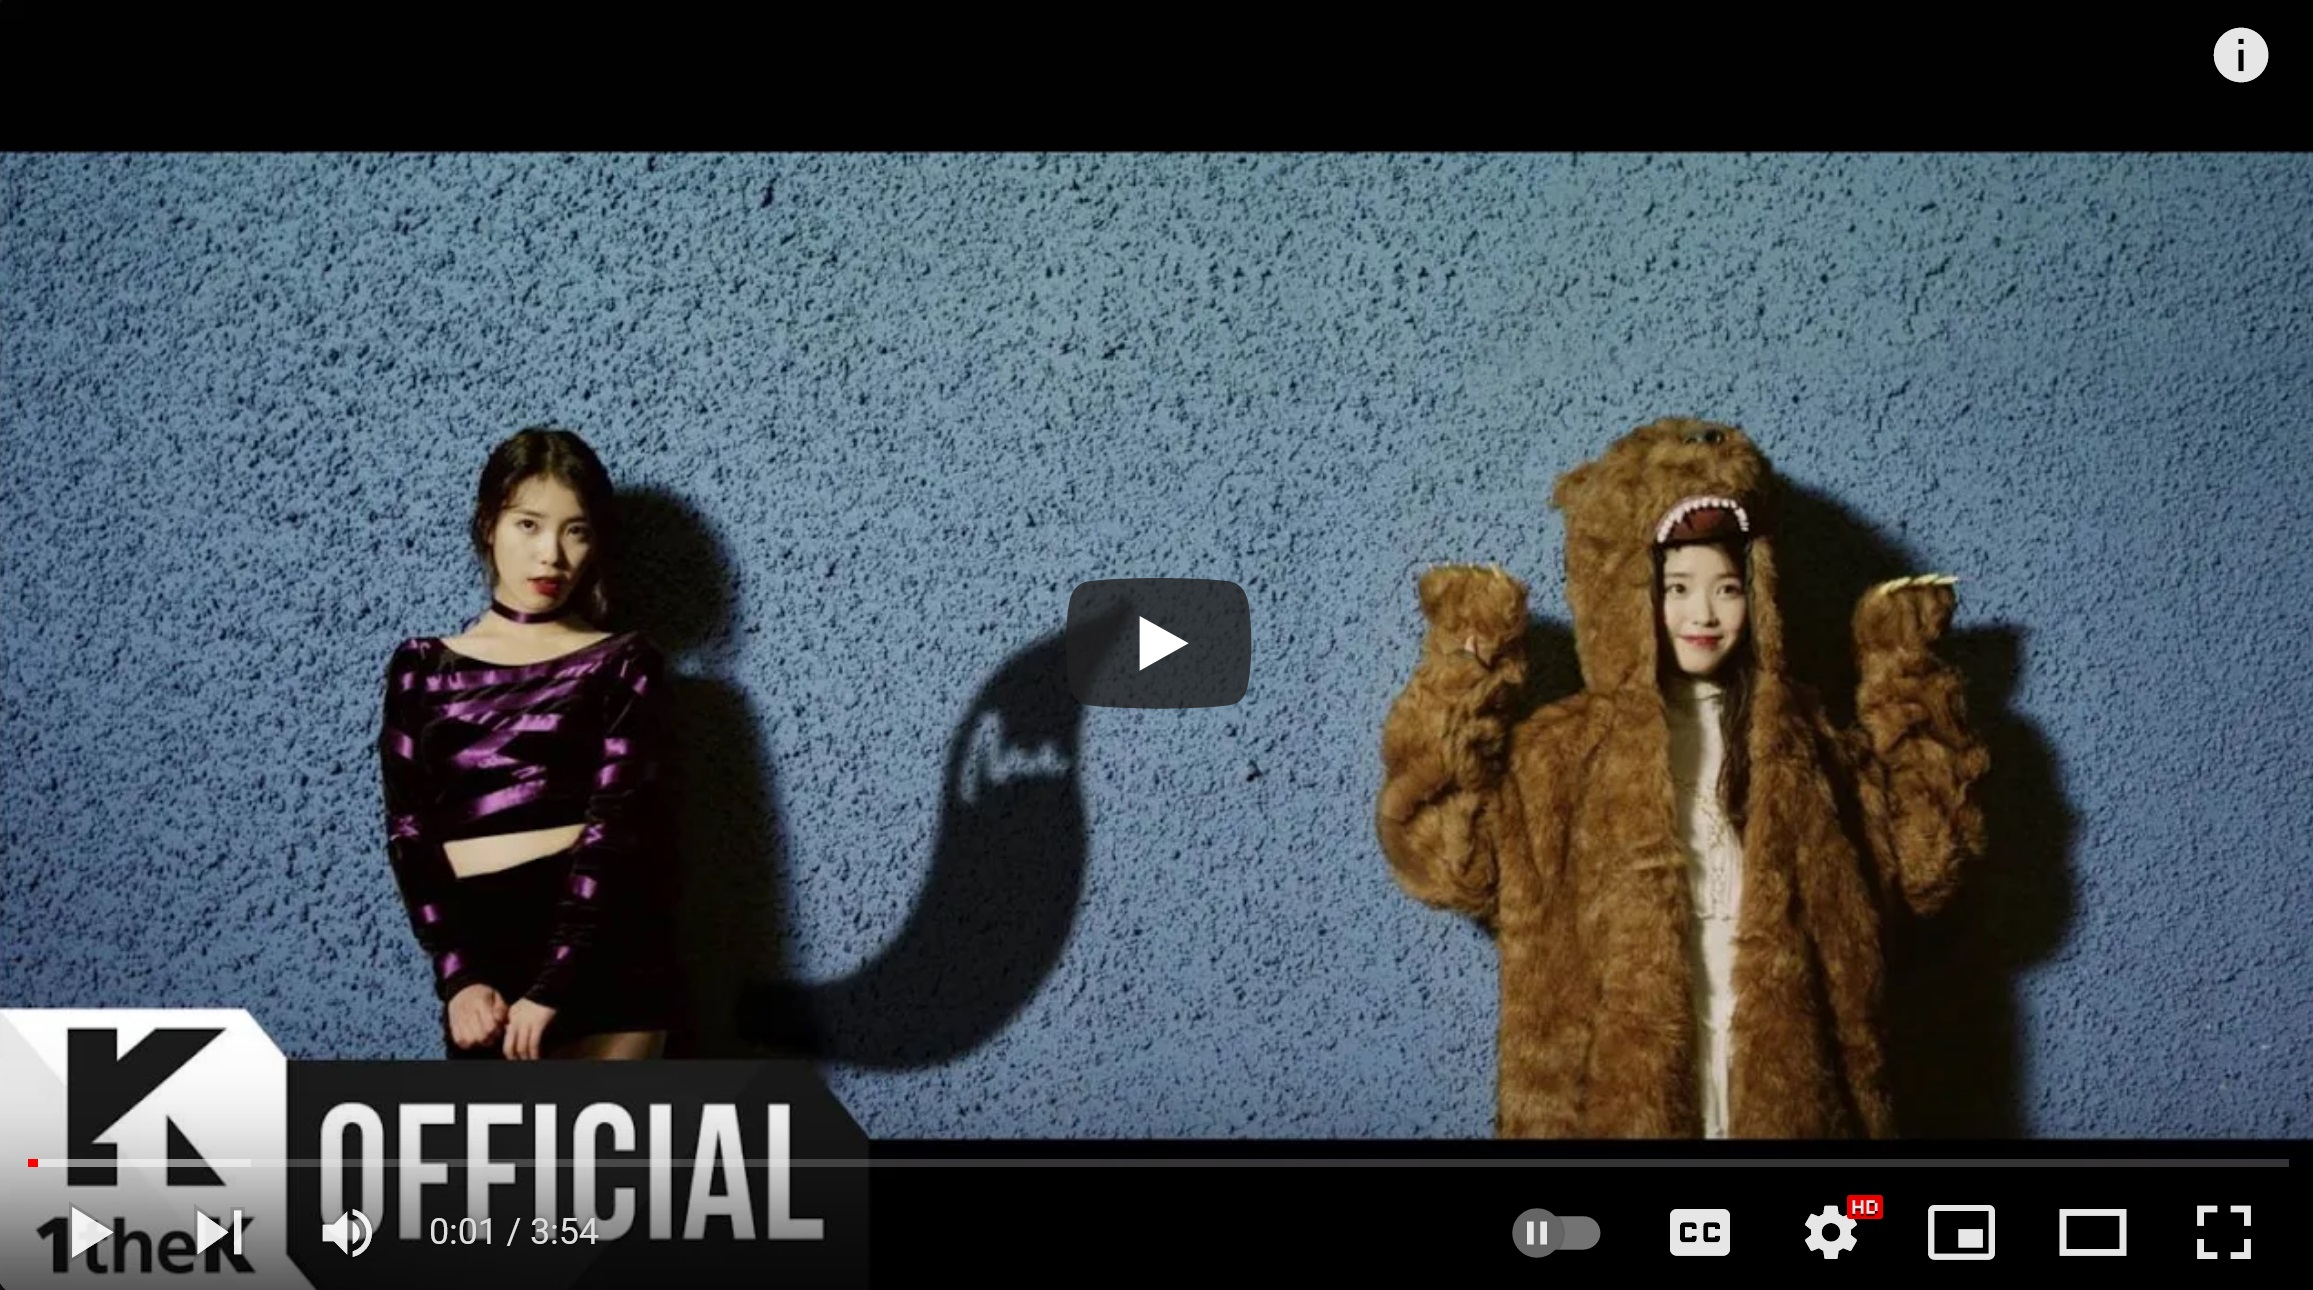 IU becomes 1st female K-pop soloist to hit 100M views with 9 MVs